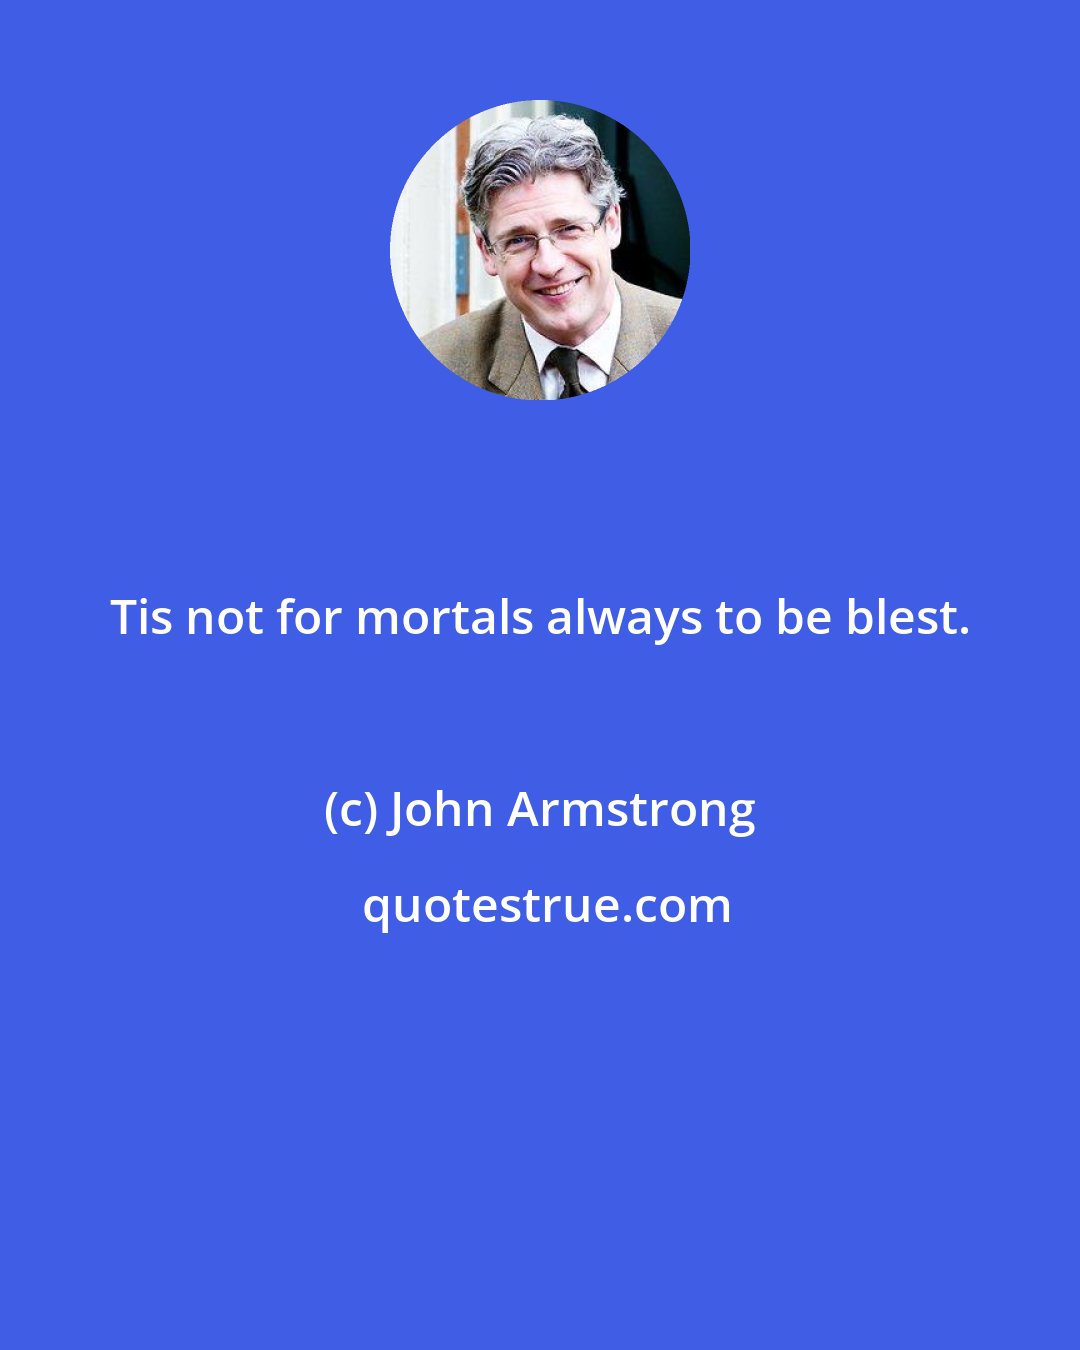 John Armstrong: Tis not for mortals always to be blest.